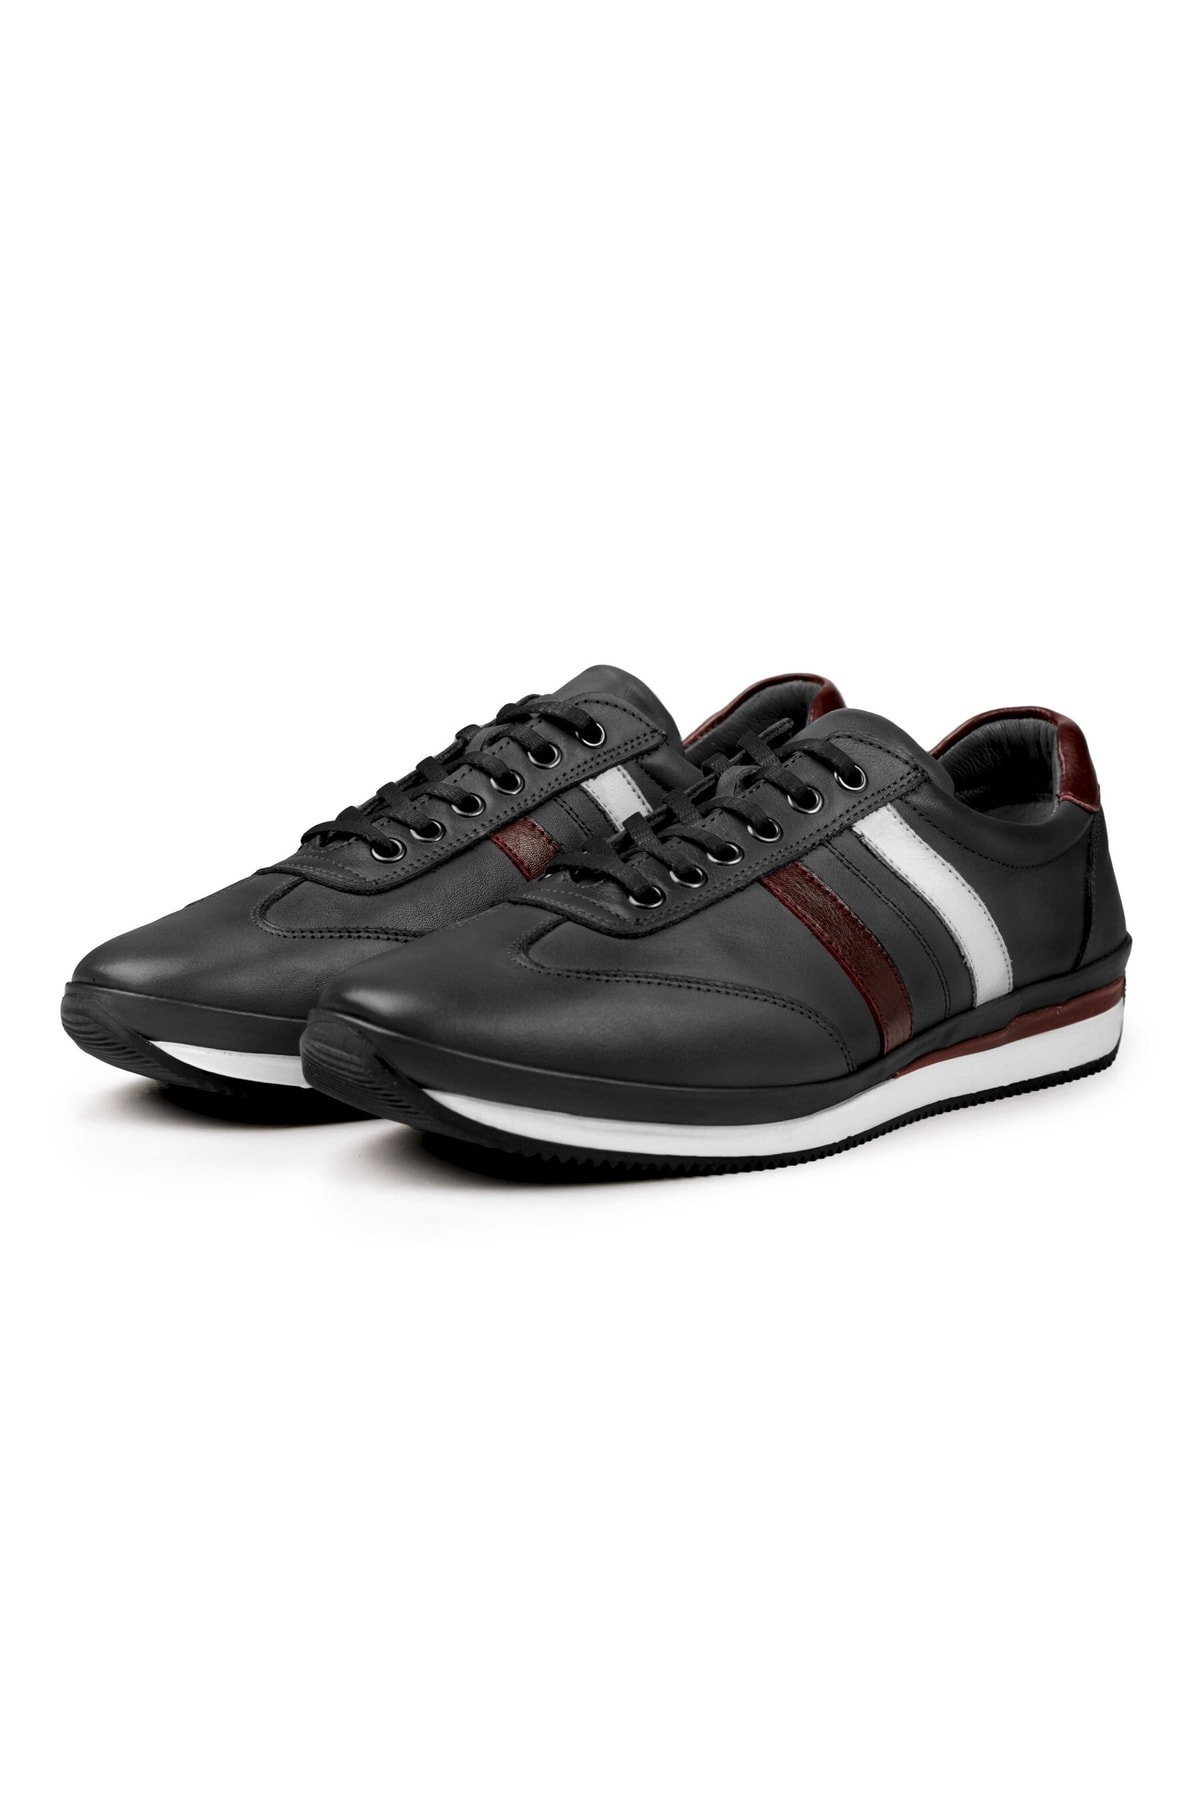 Levně Ducavelli Dynamic Genuine Leather Men's Casual Shoes, 100% Leather Shoes, All Seasons Shoes.